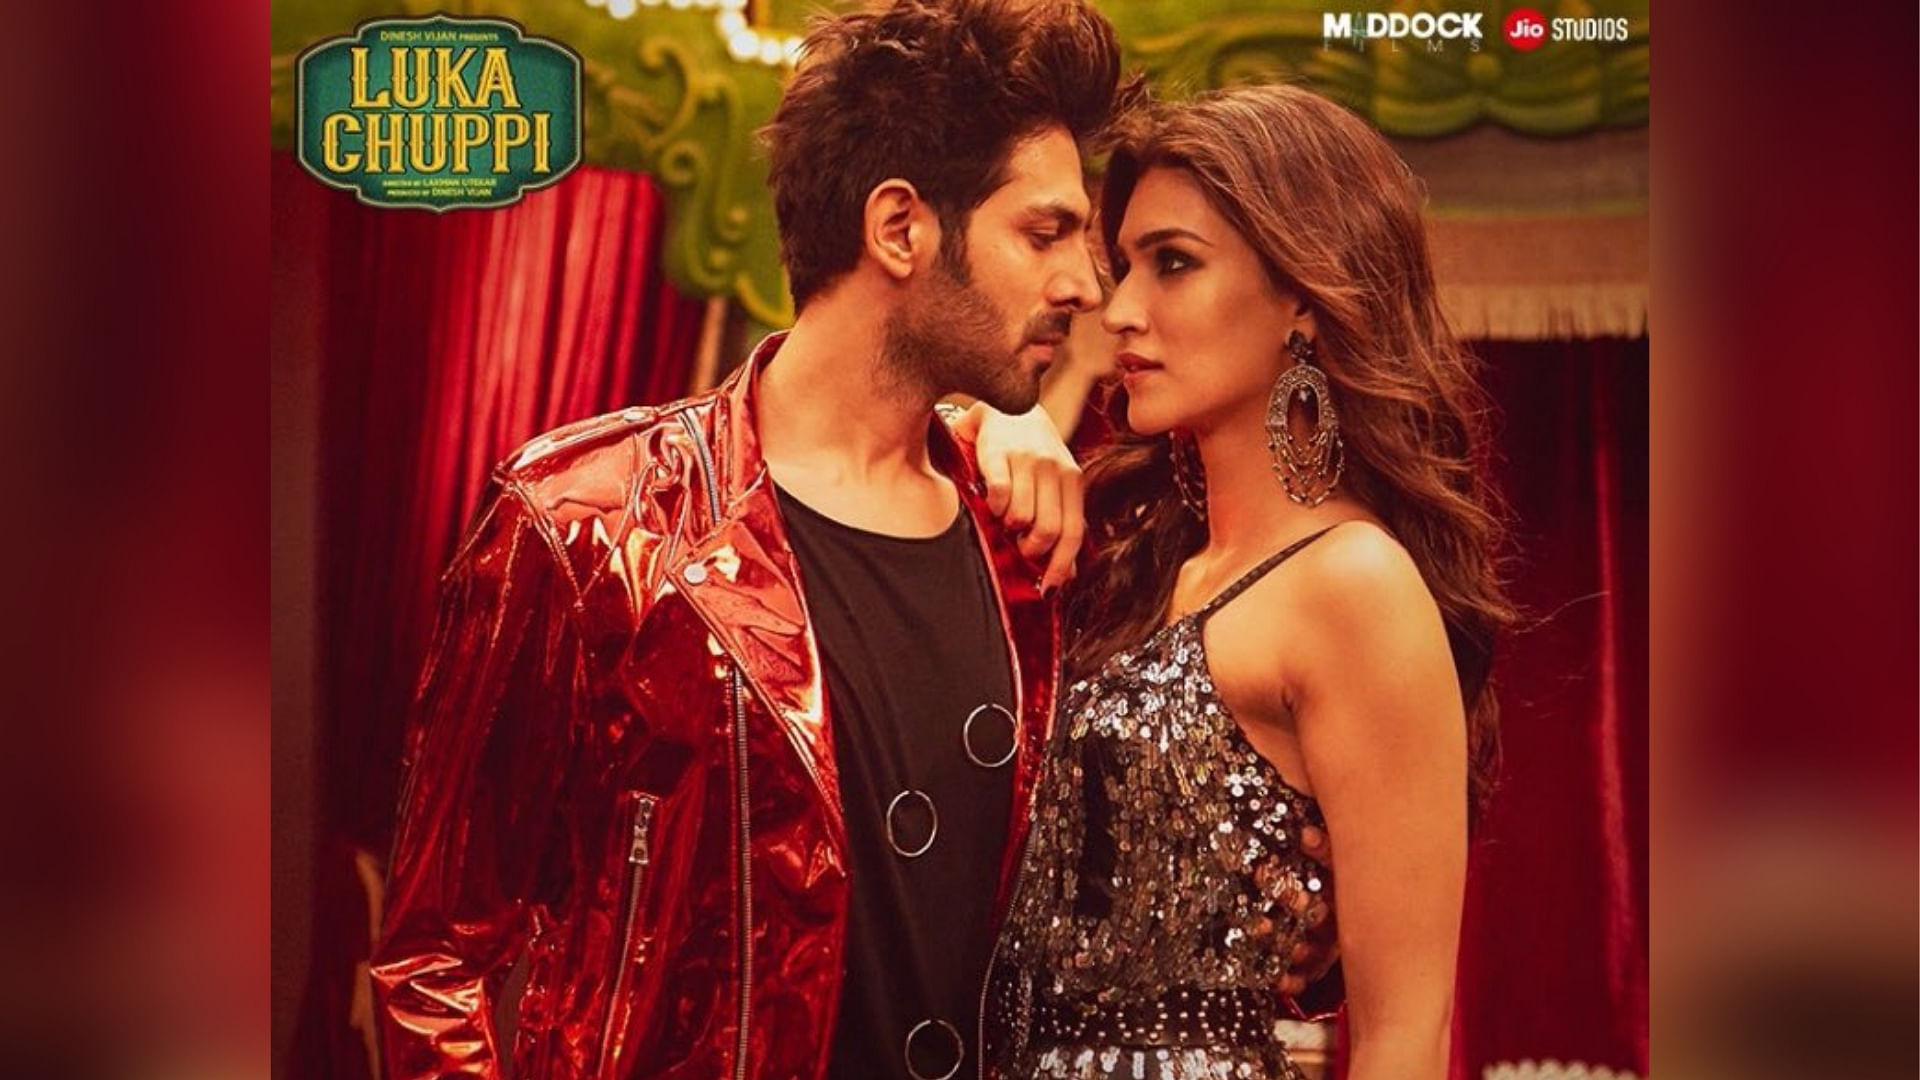 Luka Chuppi Song Released: Groove to New 'Luka Chuppi' Party Track 'Coca  Cola' with Kartik Aaryan & Kriti Sanon